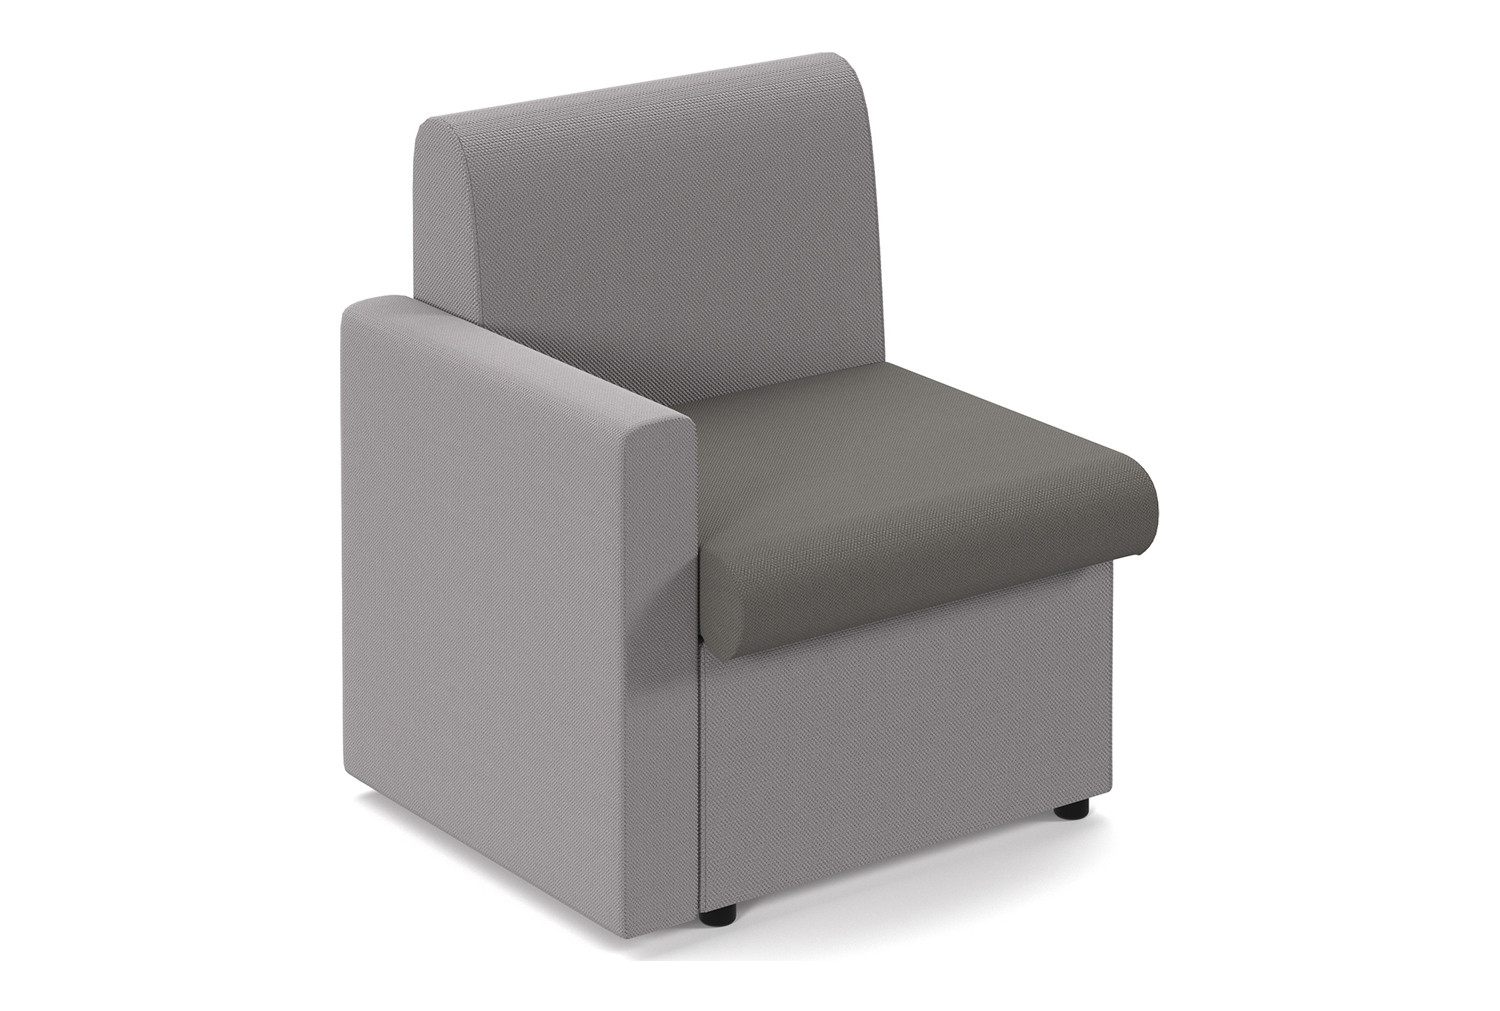 Portland 2 Tone Modular Soft Seating, Reception Chair With Right Arm, Present Seat/Forecast Back